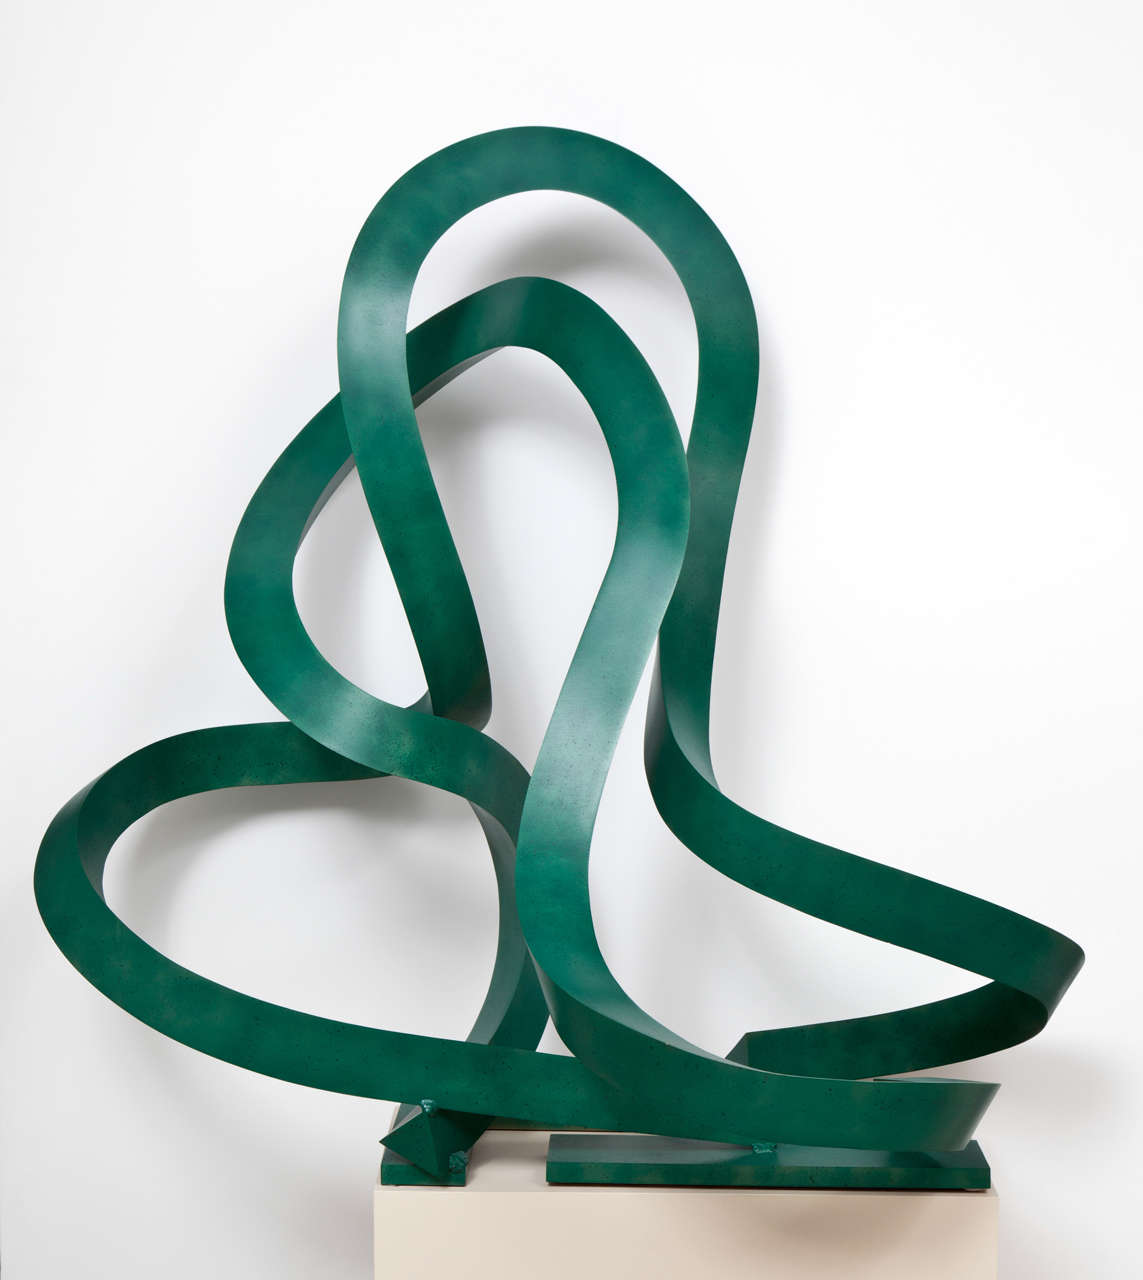 Elliptical Loops, 2005 Bronze with green patina By Arthur Carter